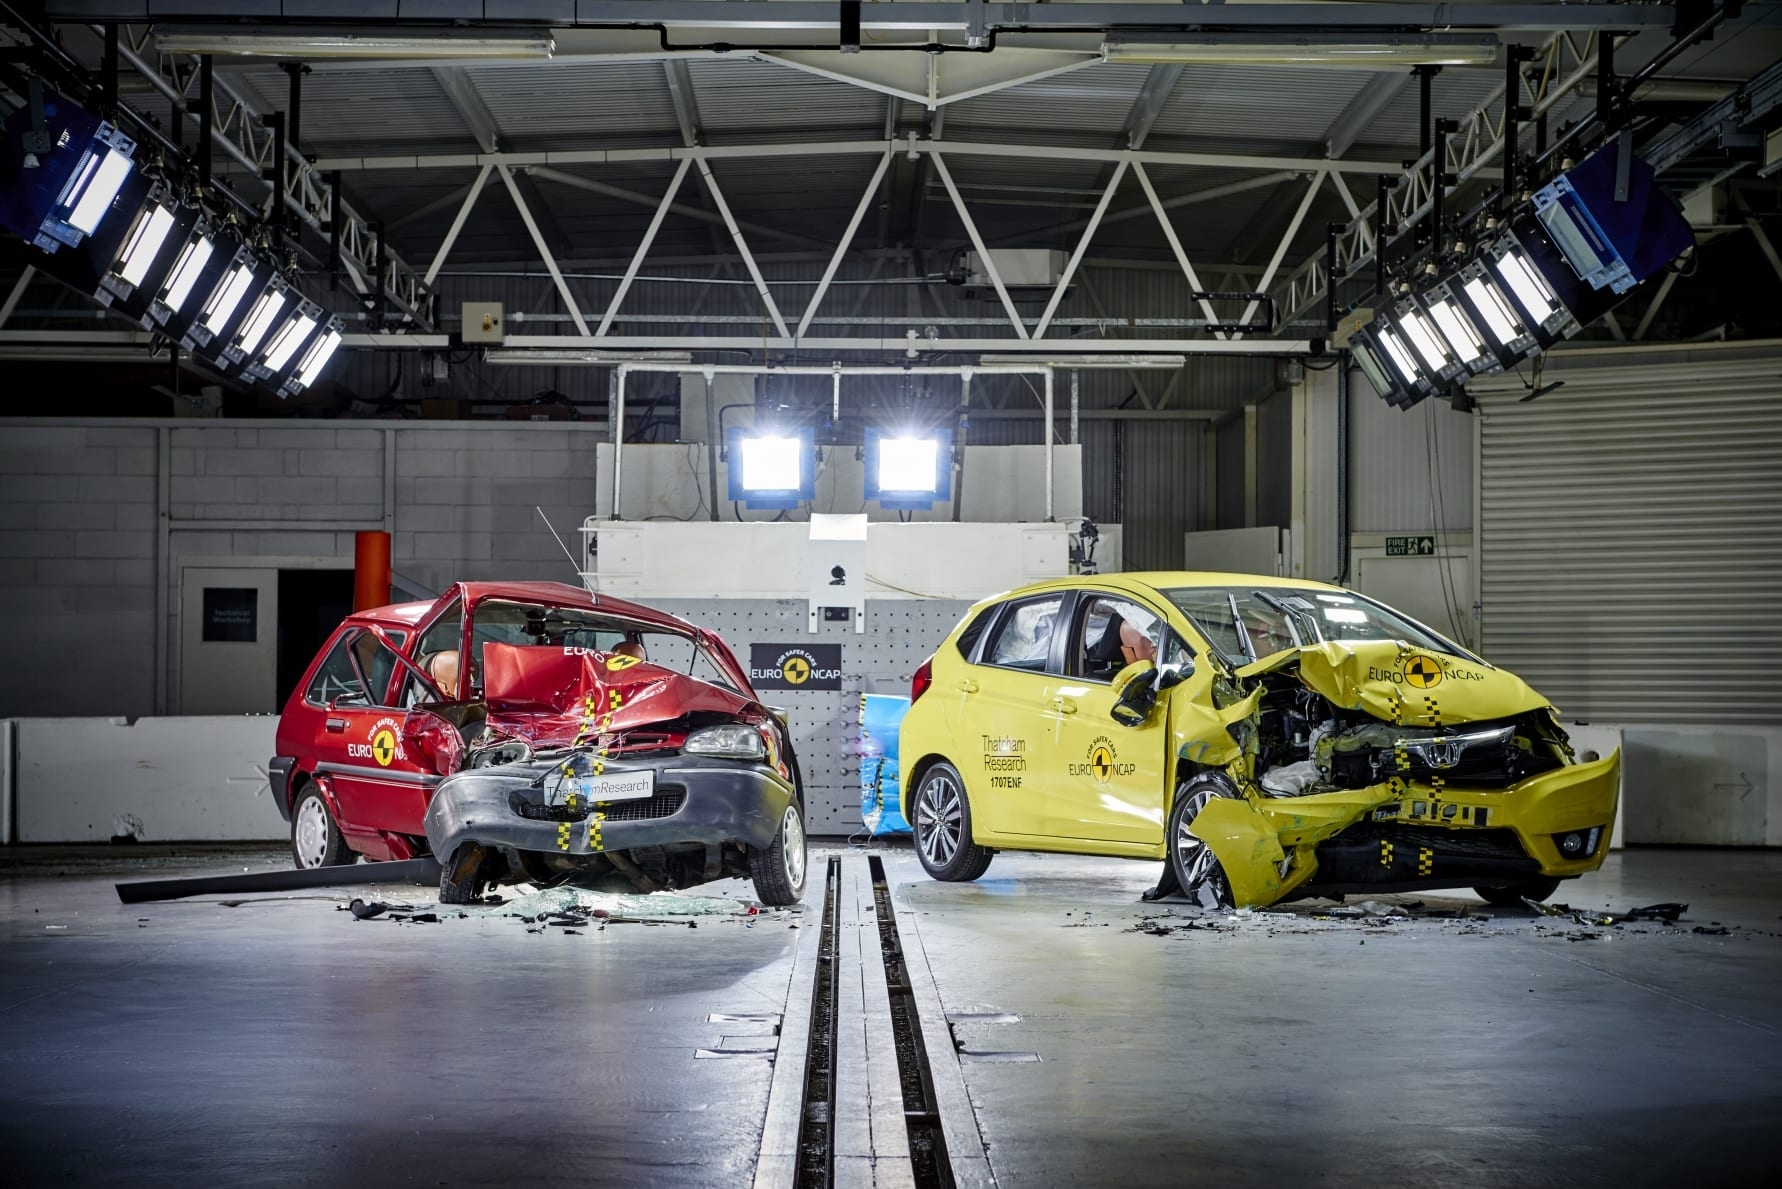 Euro NCAP 20th - the 1997 Rover 100 & a current Honda Jazz post-crash test. The Rover ‘safety cell’ is severely compromised, the driver compartment of the Jazz remains intact